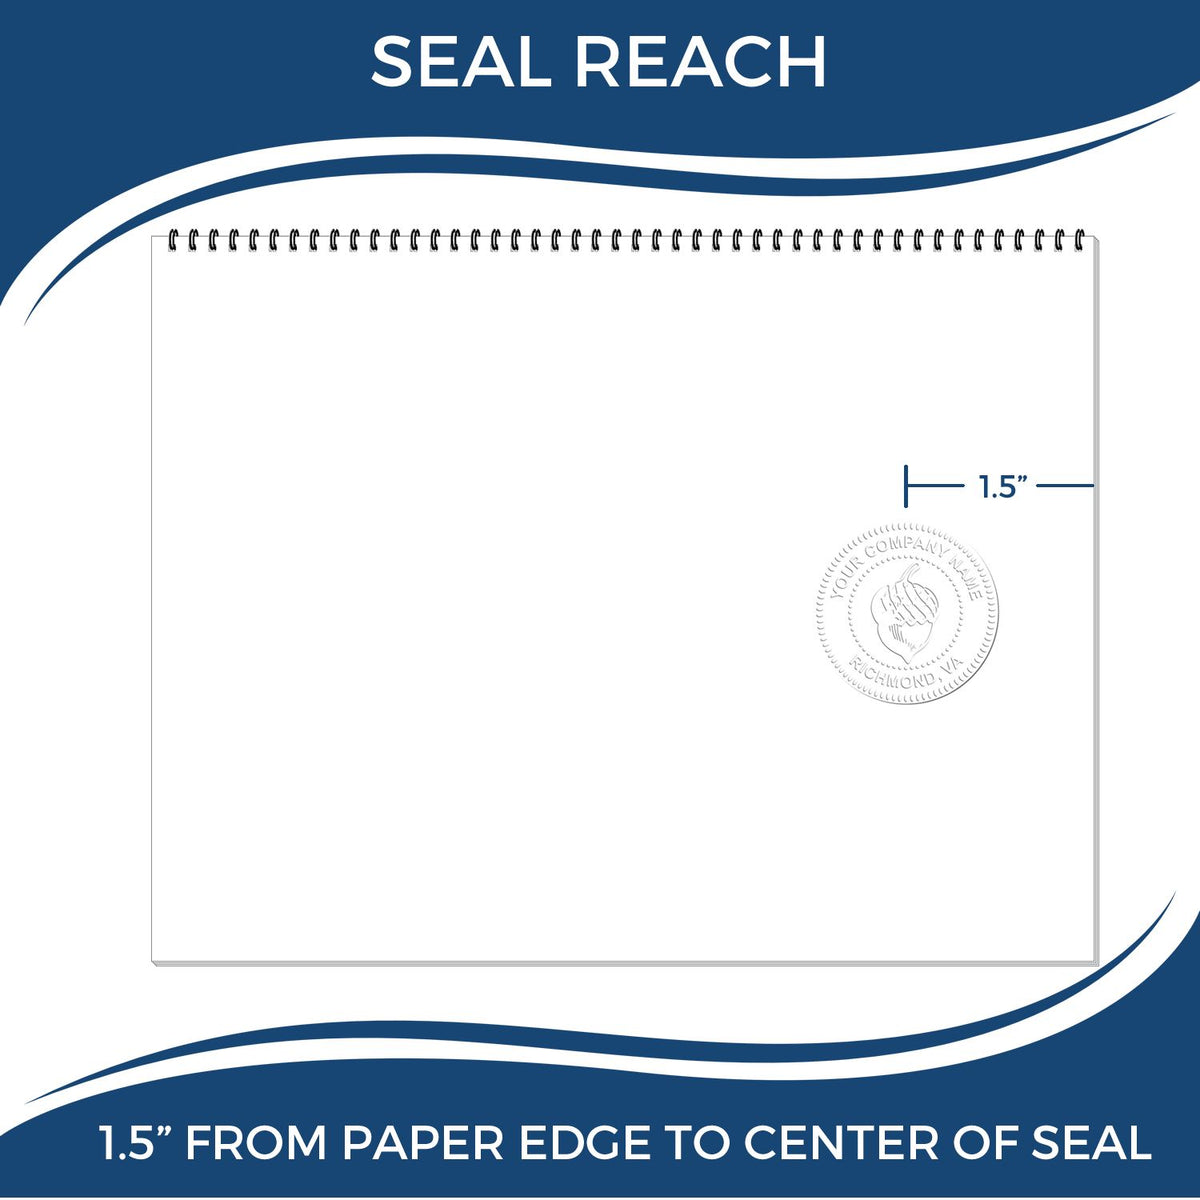 An infographic showing the seal reach which is represented by a ruler and a miniature seal image of the Gift Washington Landscape Architect Seal